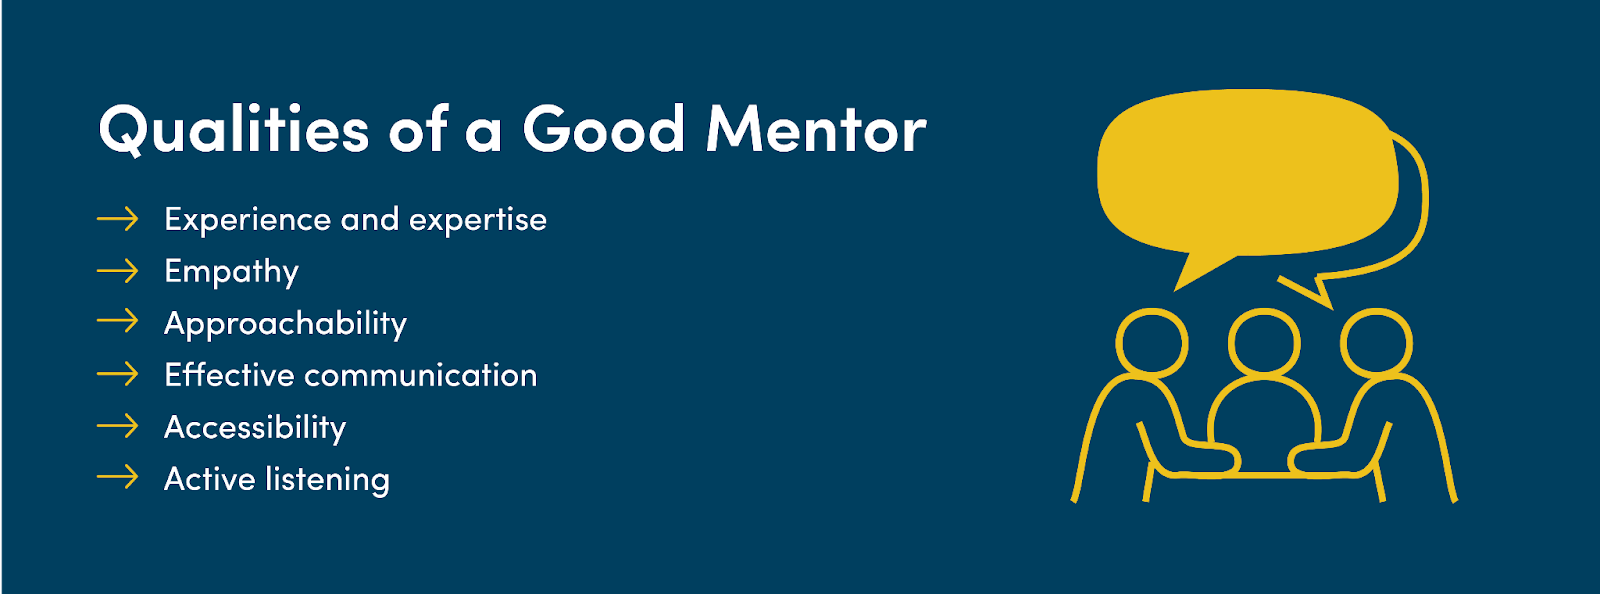 Qualities of a good mentor